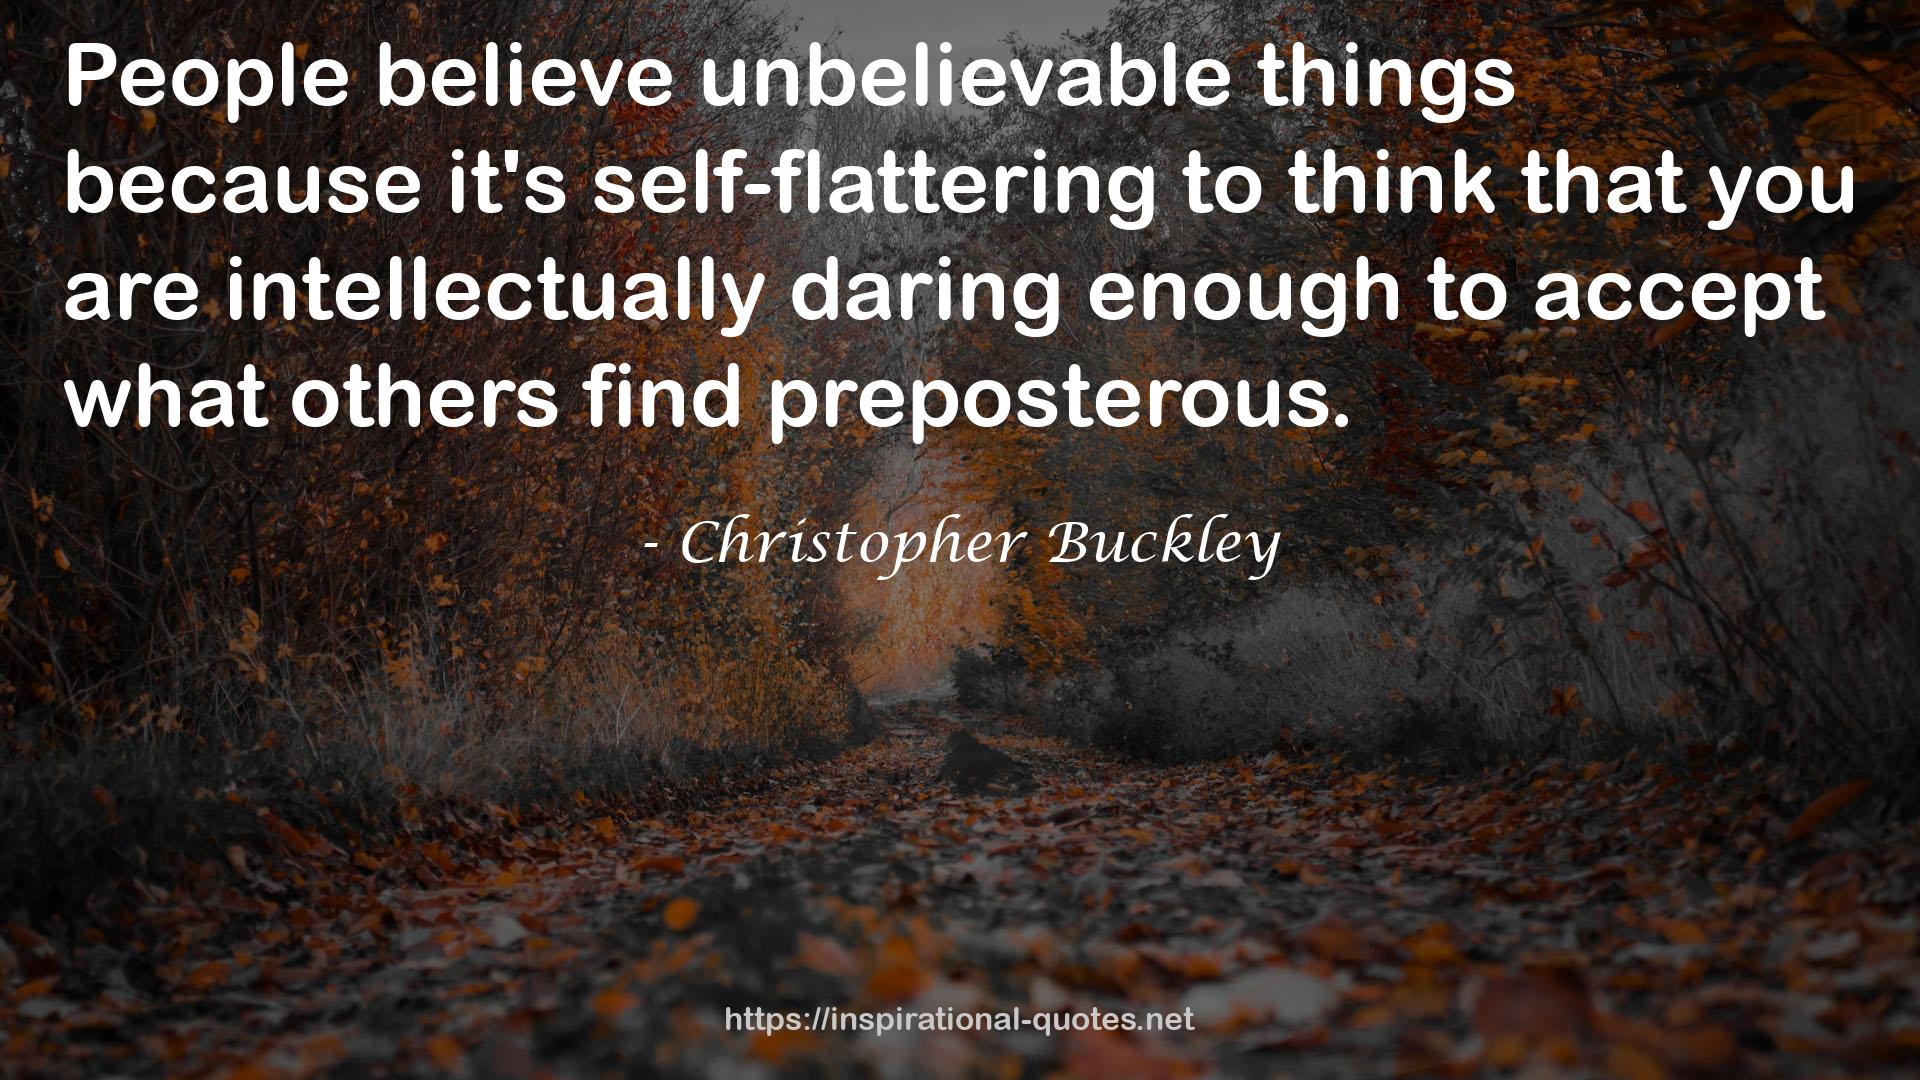 Christopher Buckley QUOTES